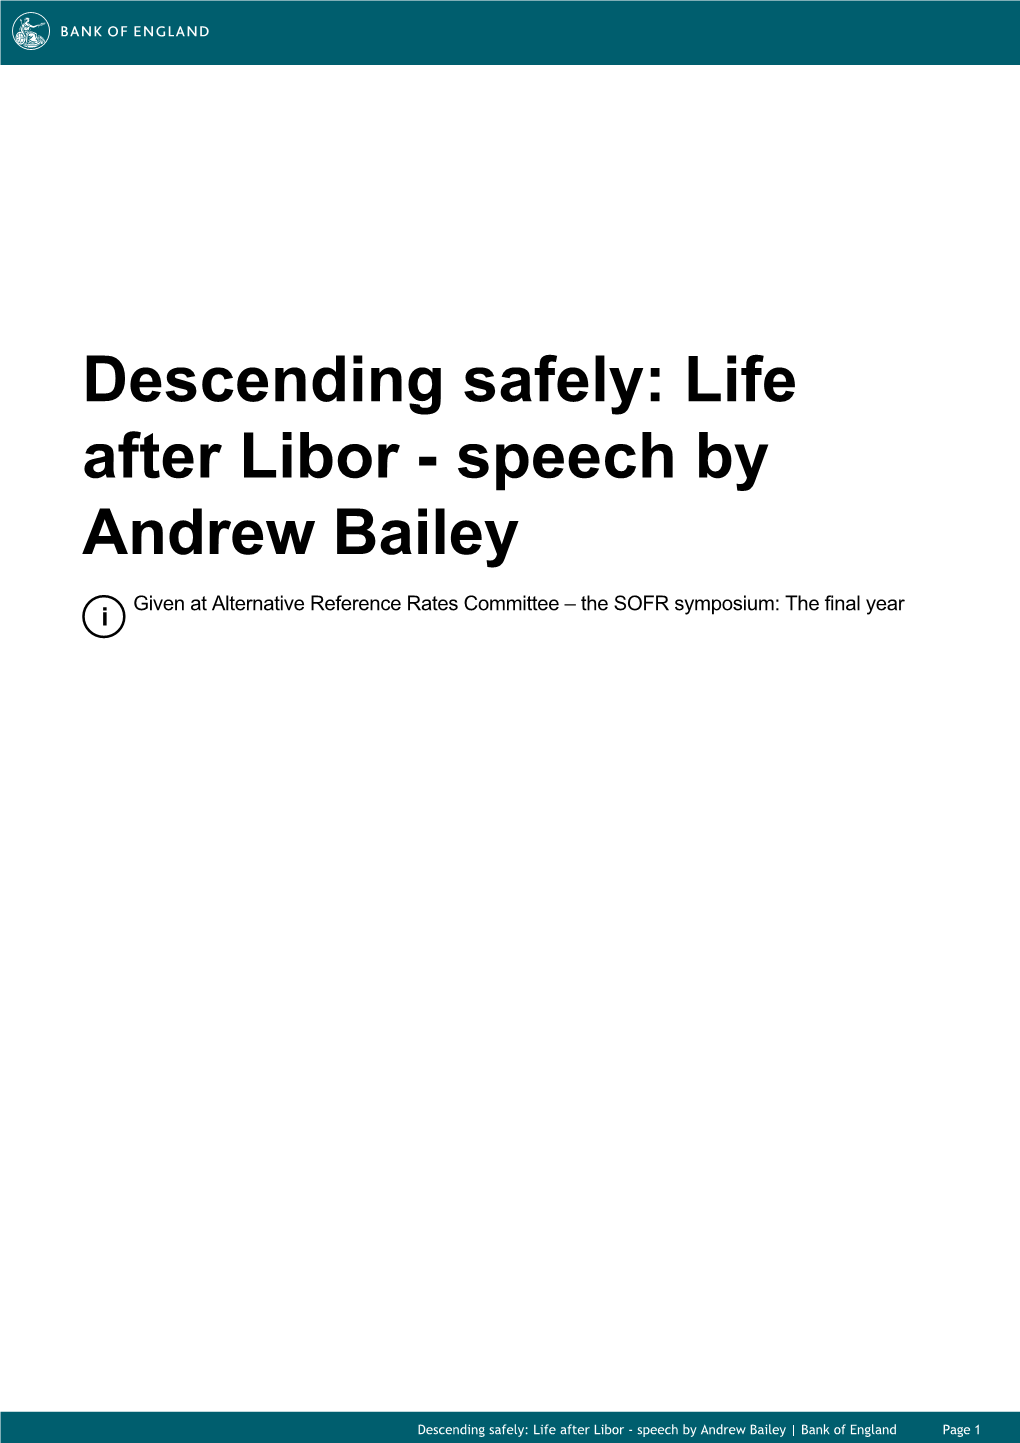 Life After Libor - Speech by Andrew Bailey